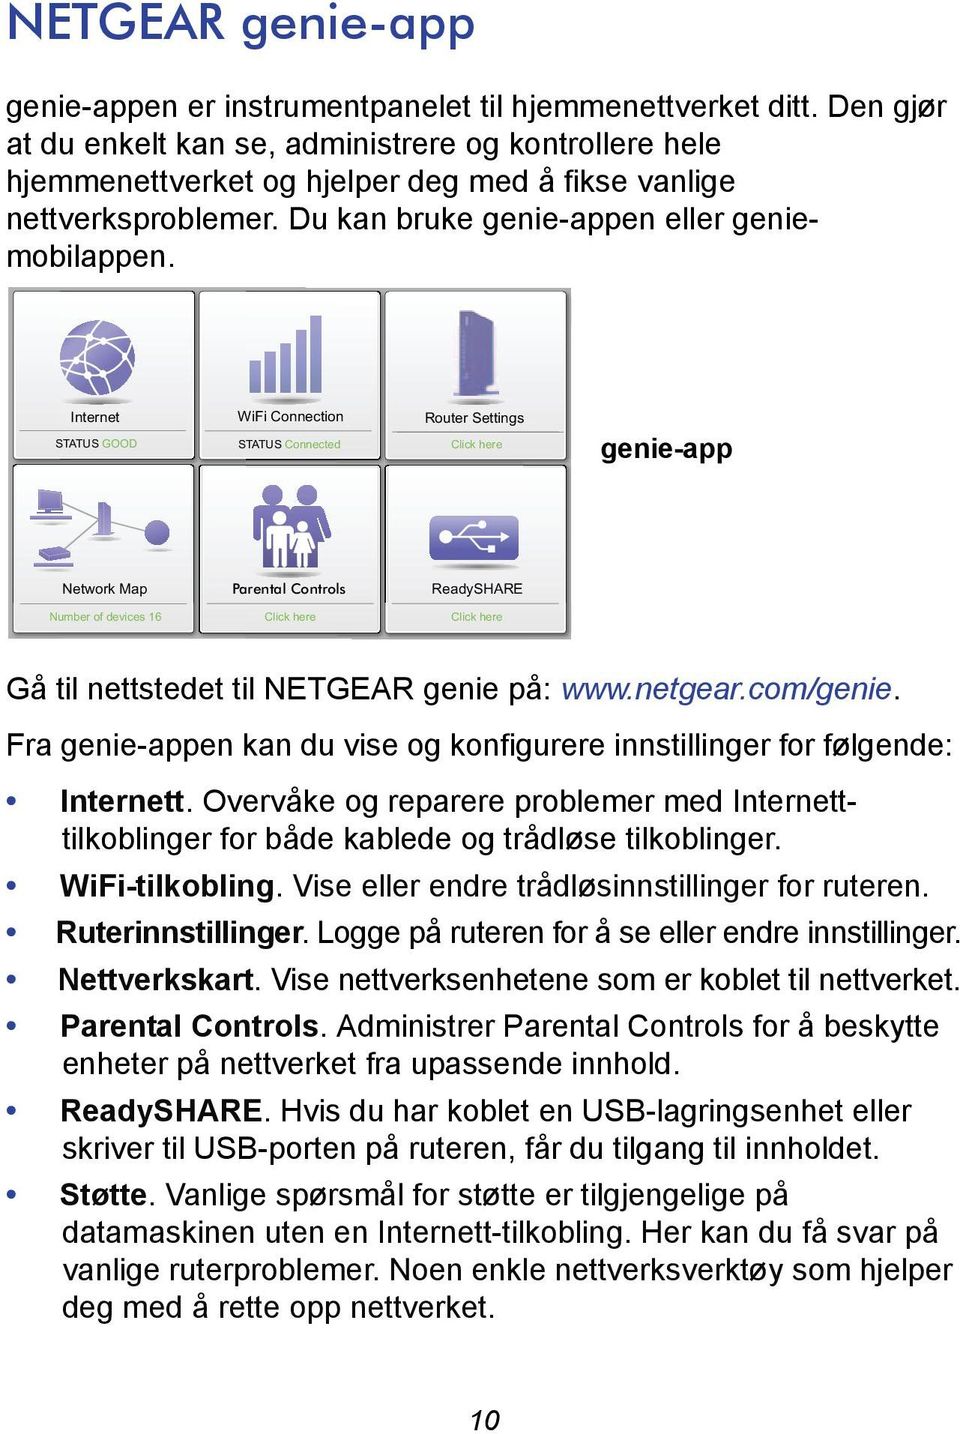 Internet STATUS GOOD WiFi Connection STATUS Connected Router Settings Click here genie-app Network Map Parental Controls ReadySHARE Number of devices 16 Click here Click here Gå til nettstedet til